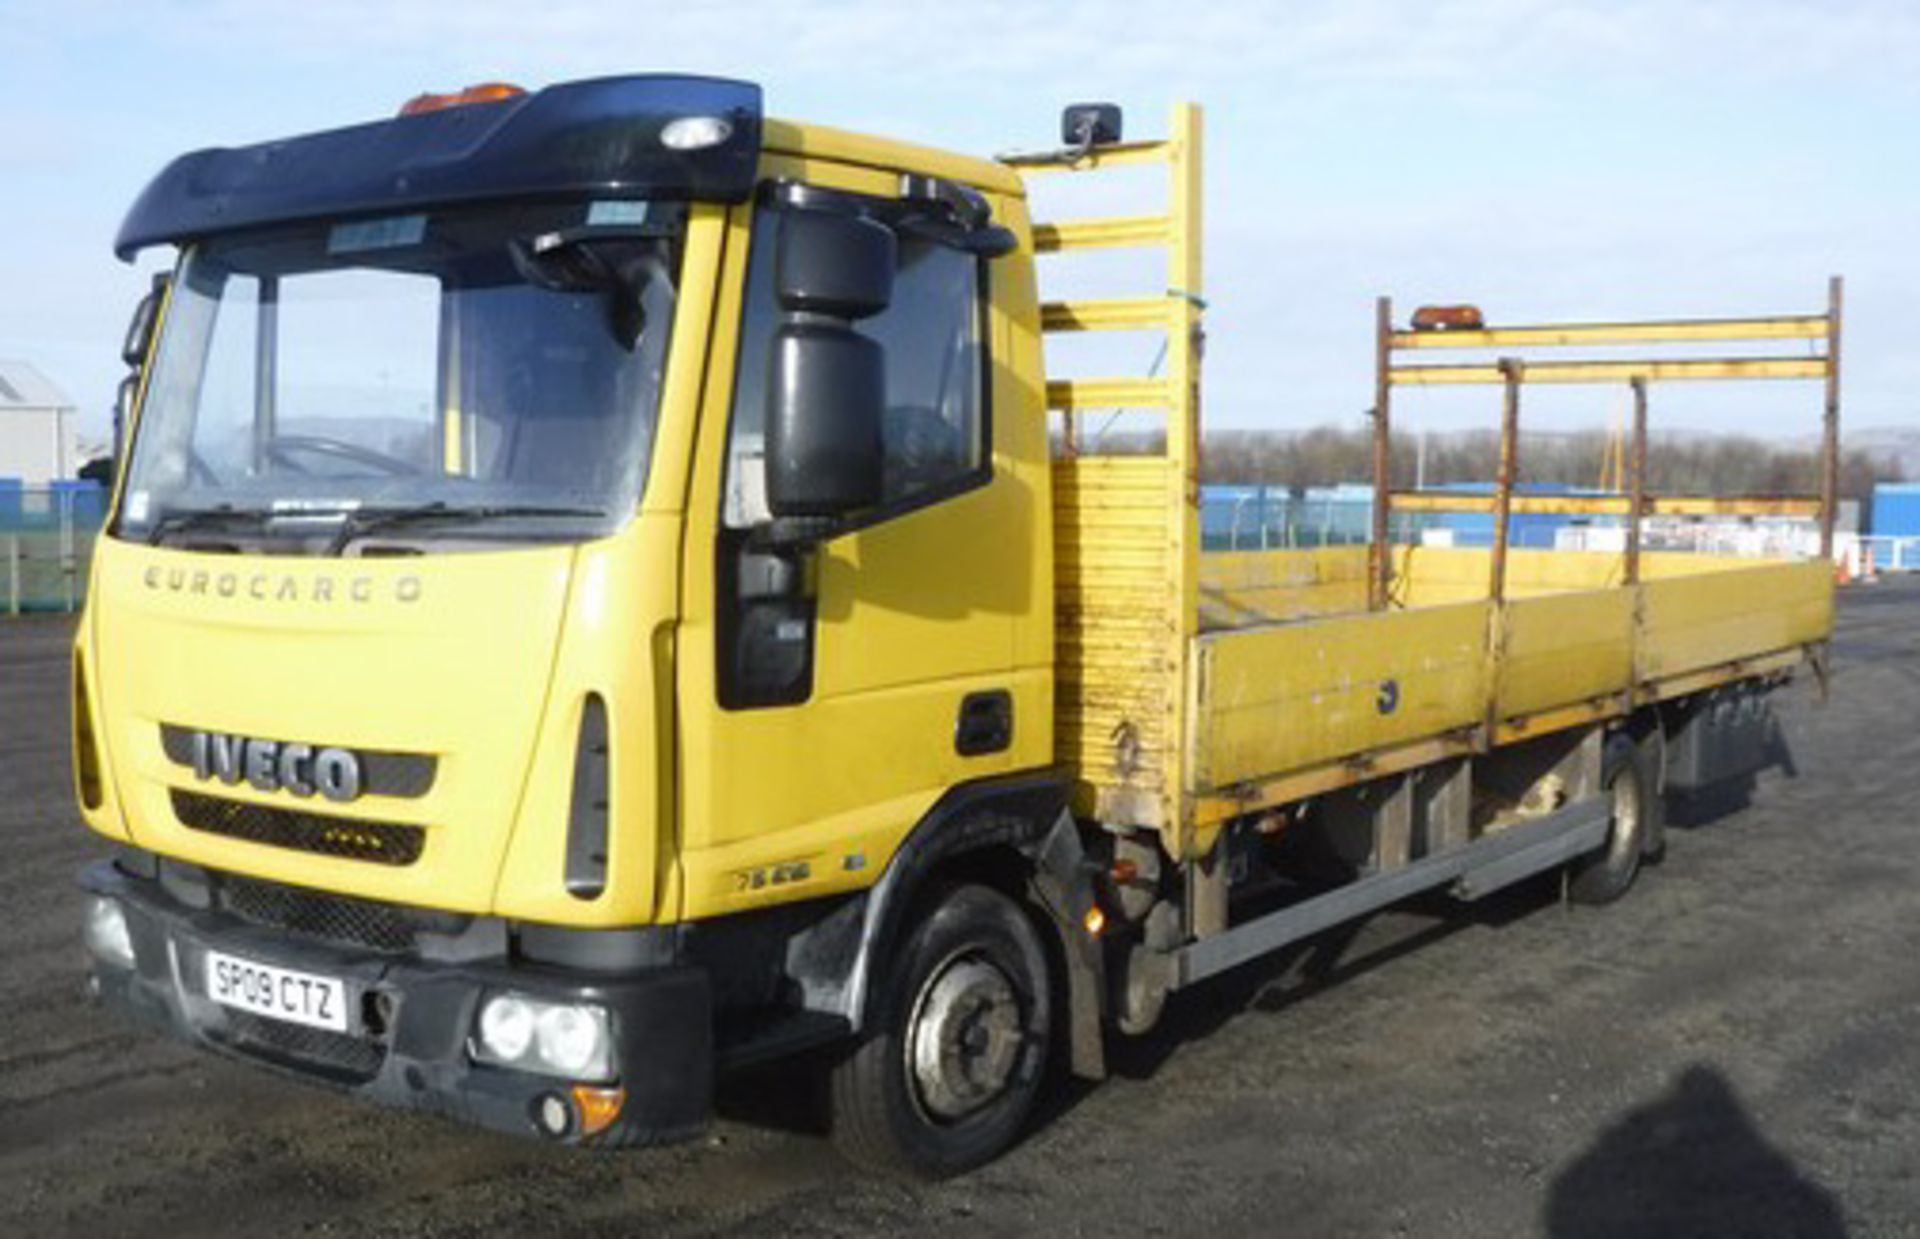 IVECO MODEL EUROCARGO (MY 2008) - 3920cc - Image 12 of 19